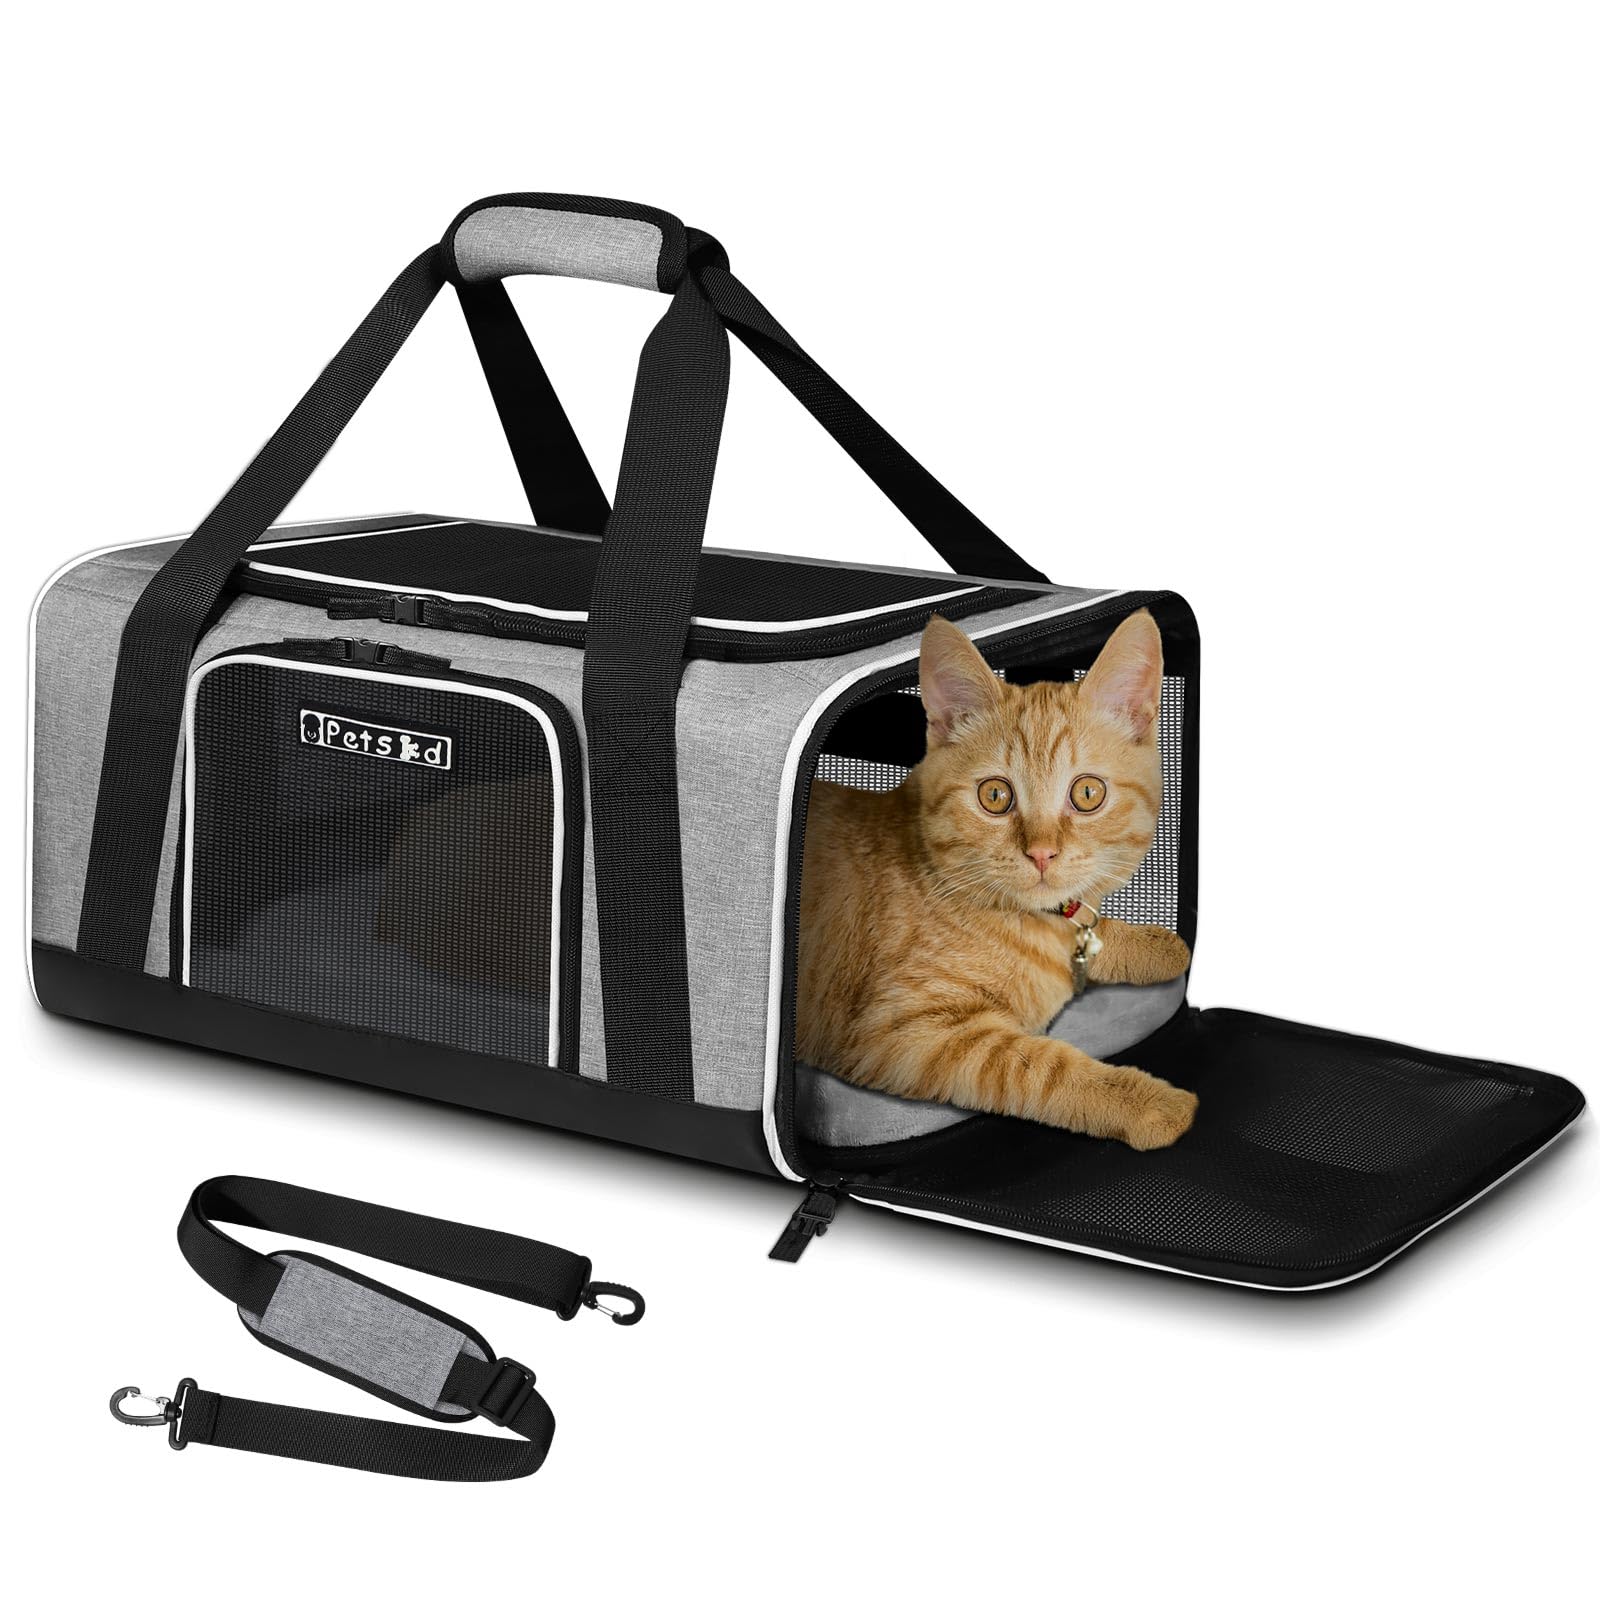 Petskd Pet Carrier 17x12x8.5 JetBlue Allegiant Airline Approved,Pet Travel Carrier Bag for Small Cats and Dogs, Soft Dog Carrier